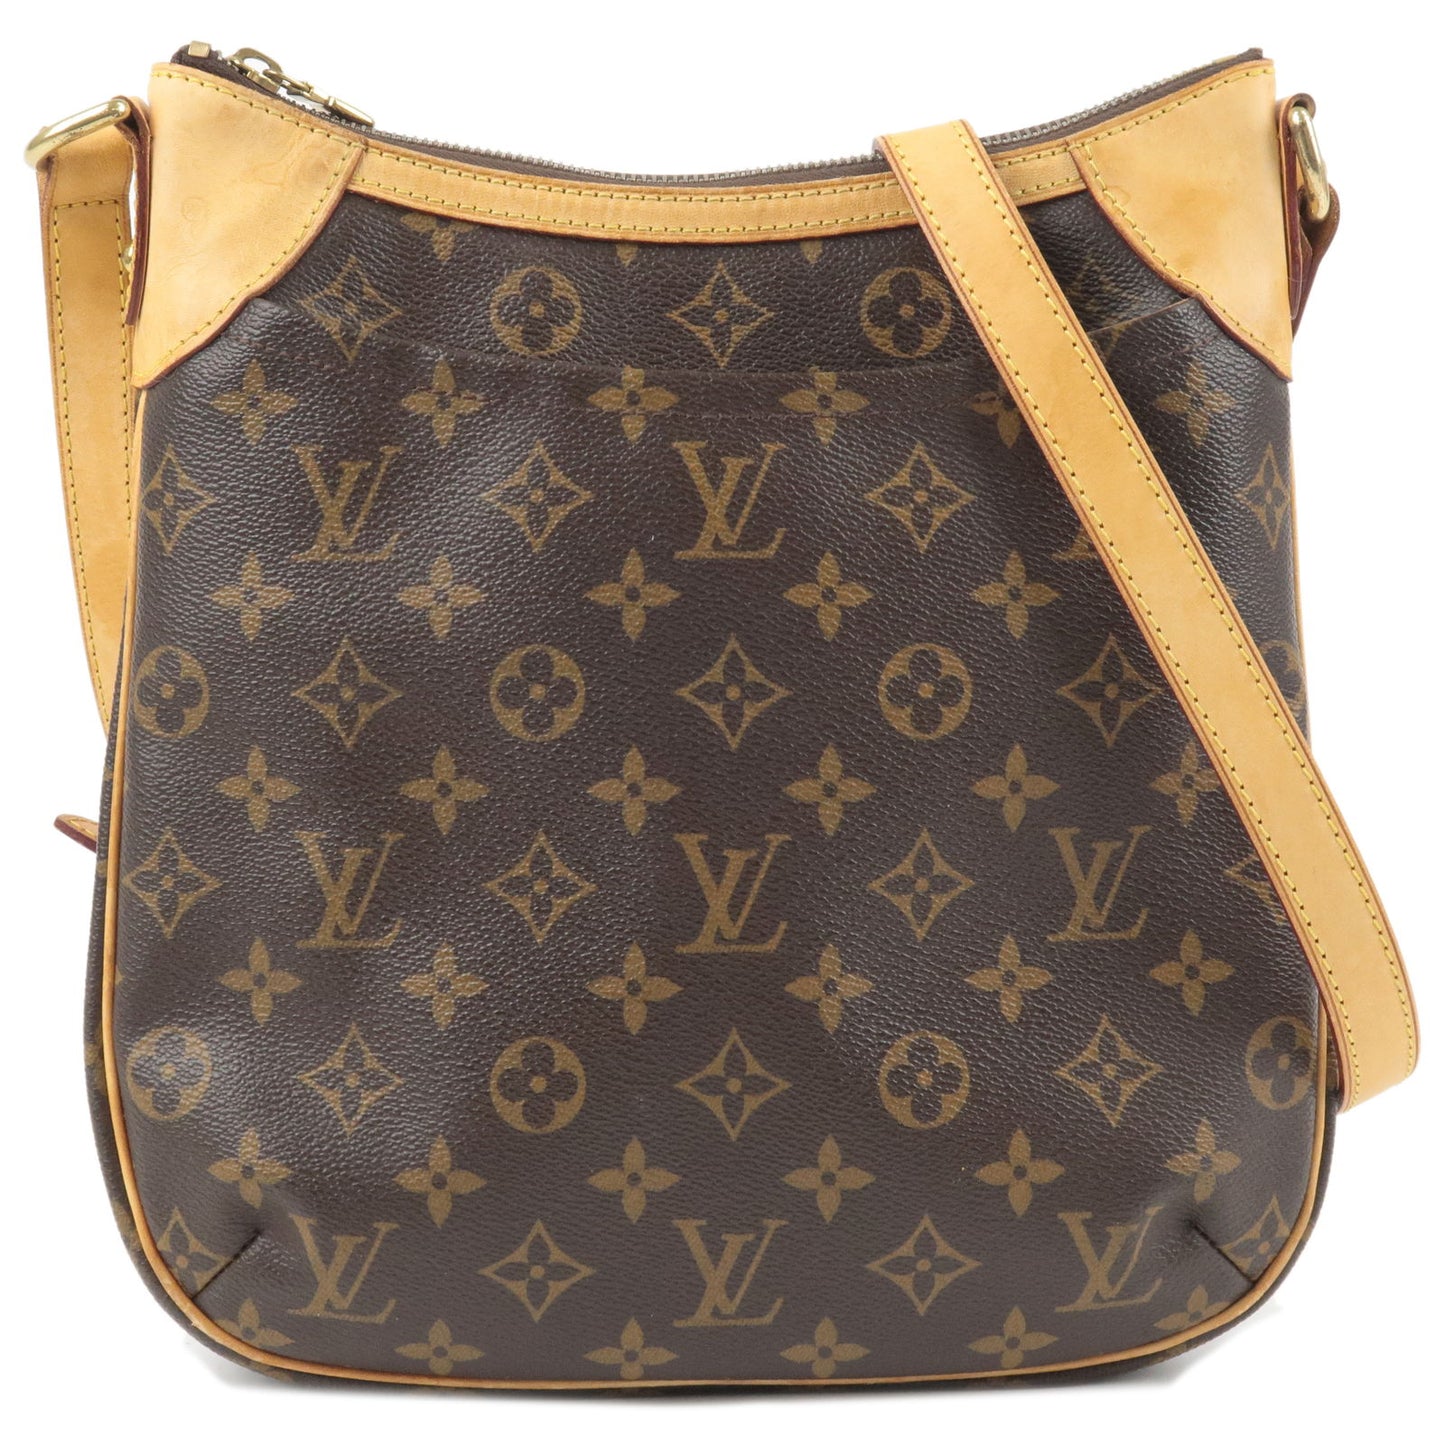 Louis Vuitton 2015 Pre-Owned Odeon PM Shoulder Bag - Brown